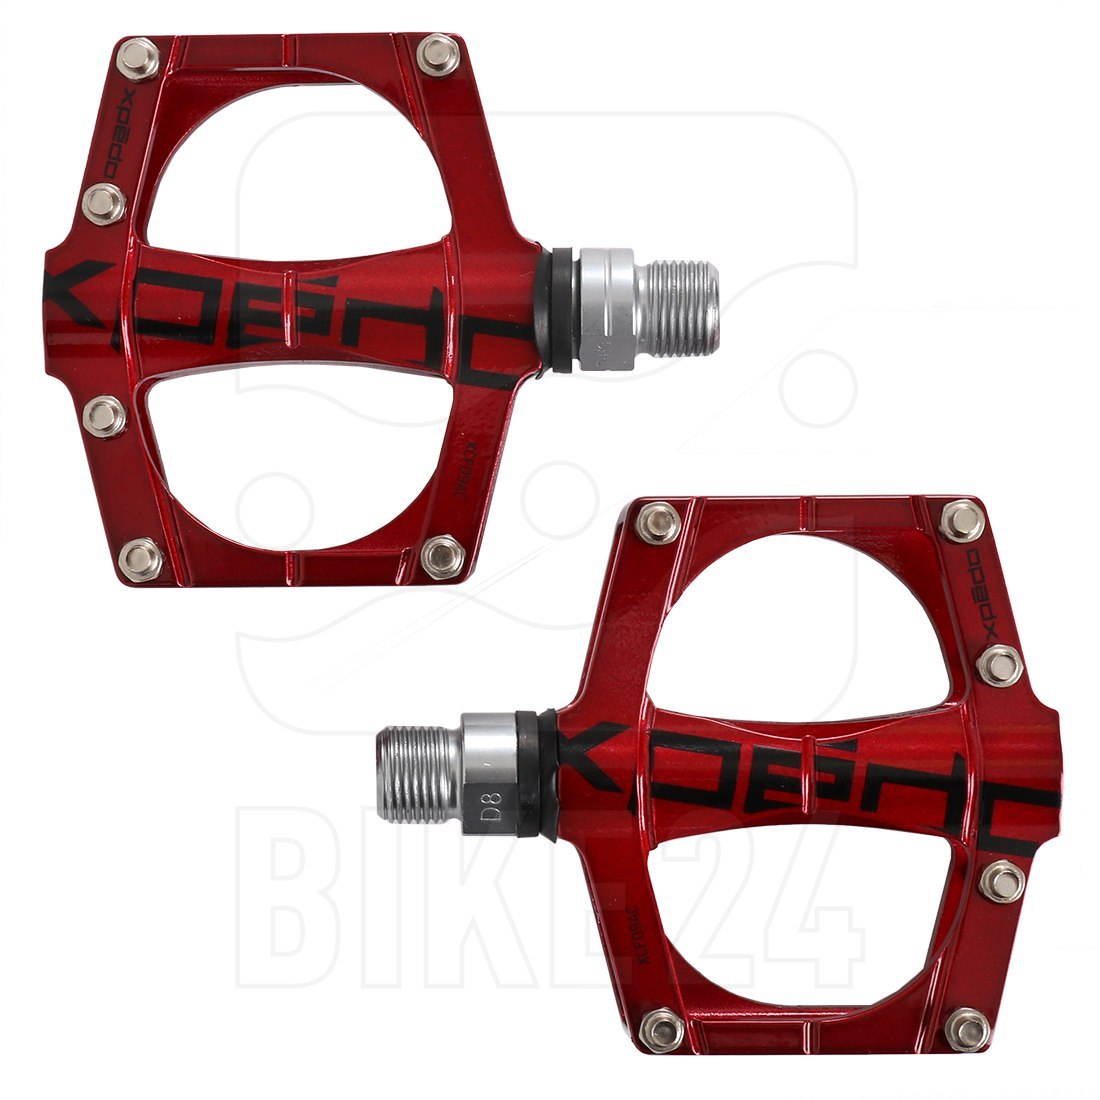 Picture of Xpedo TRVS 9 Pedals - red